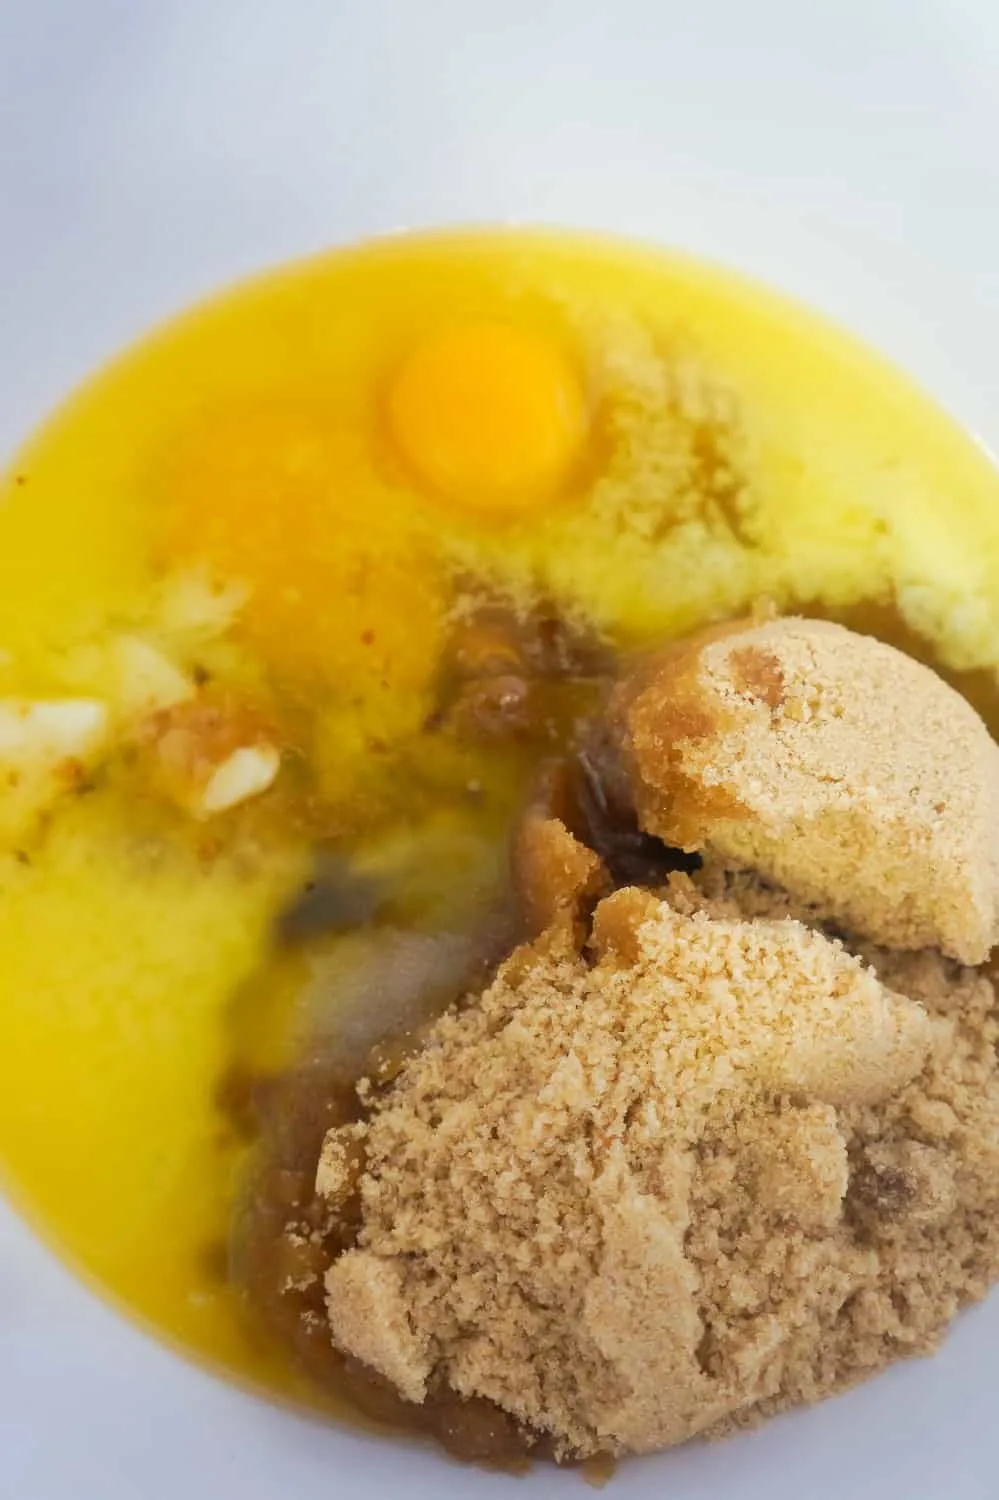 eggs, melted butter and brown sugar in a mixing bowl